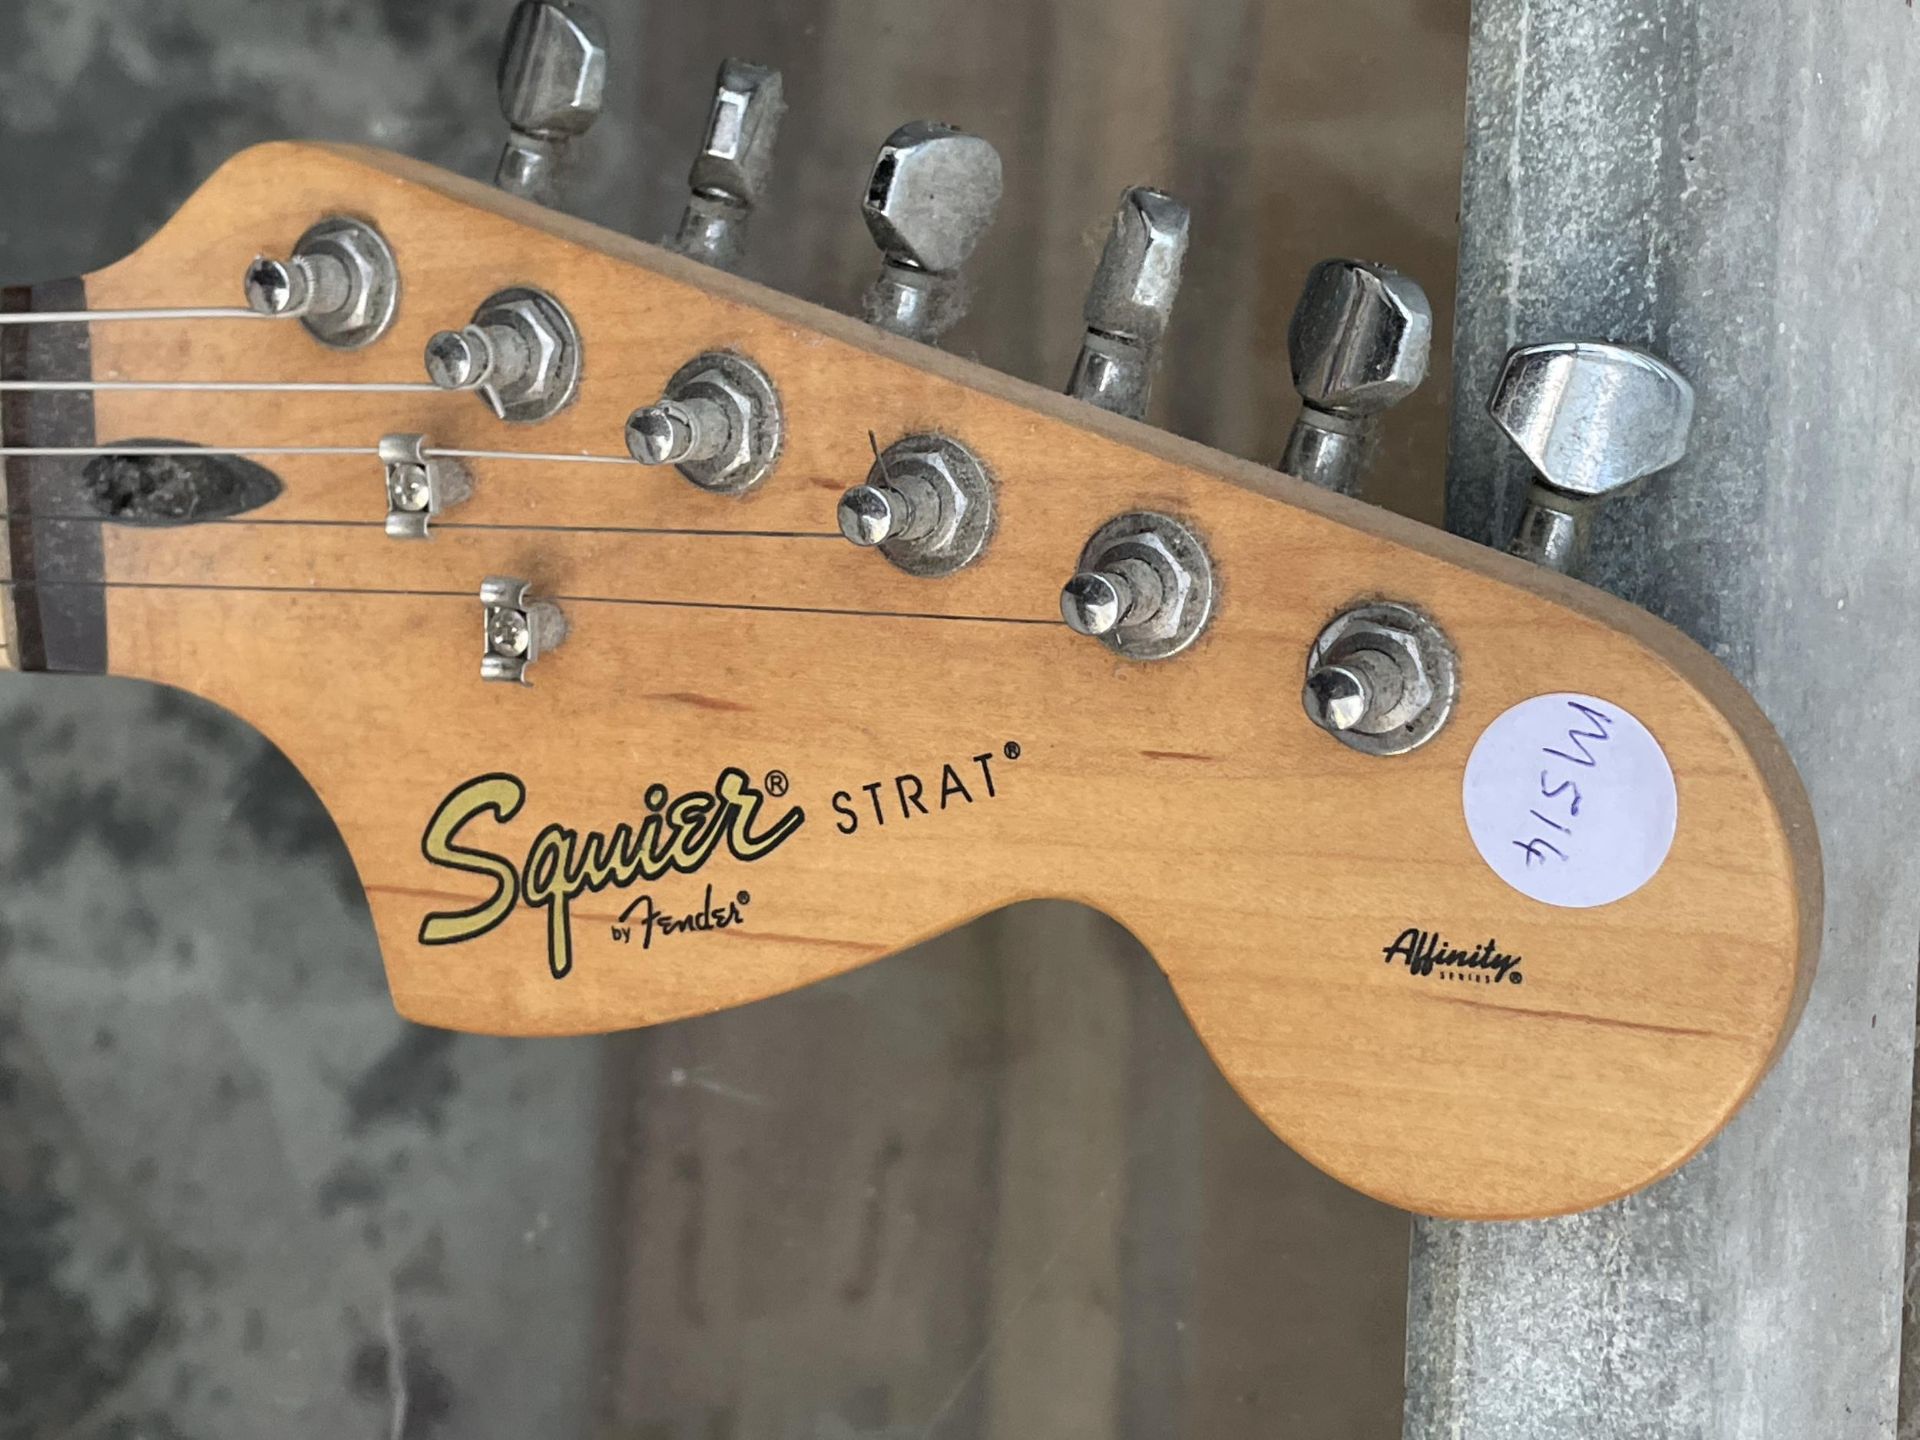 A SQUIRE STRAT FENDER ELECTRIC GUITAR - Image 3 of 3